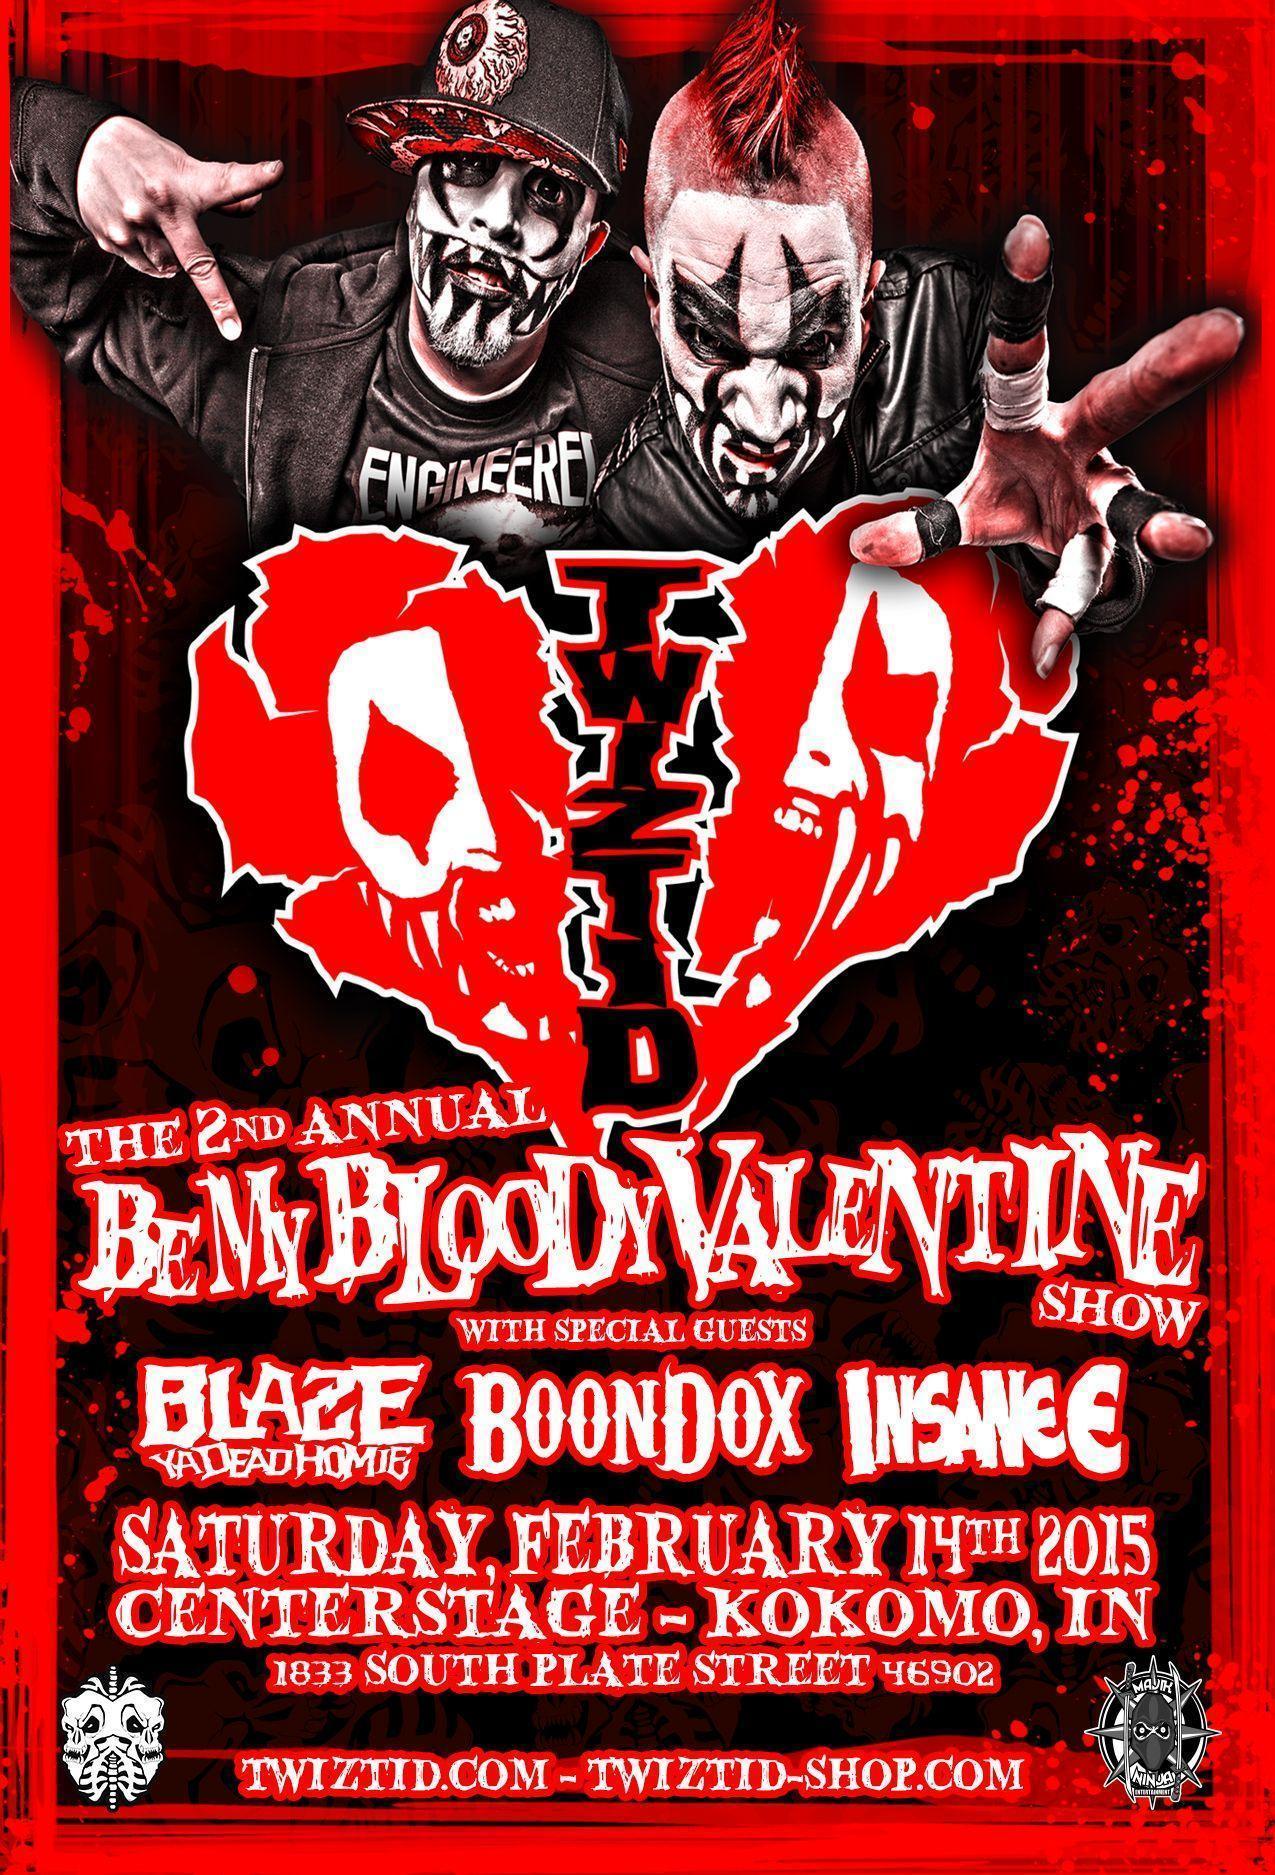 Twiztid's 2nd Annual “Be My Bloody Valentine” Show